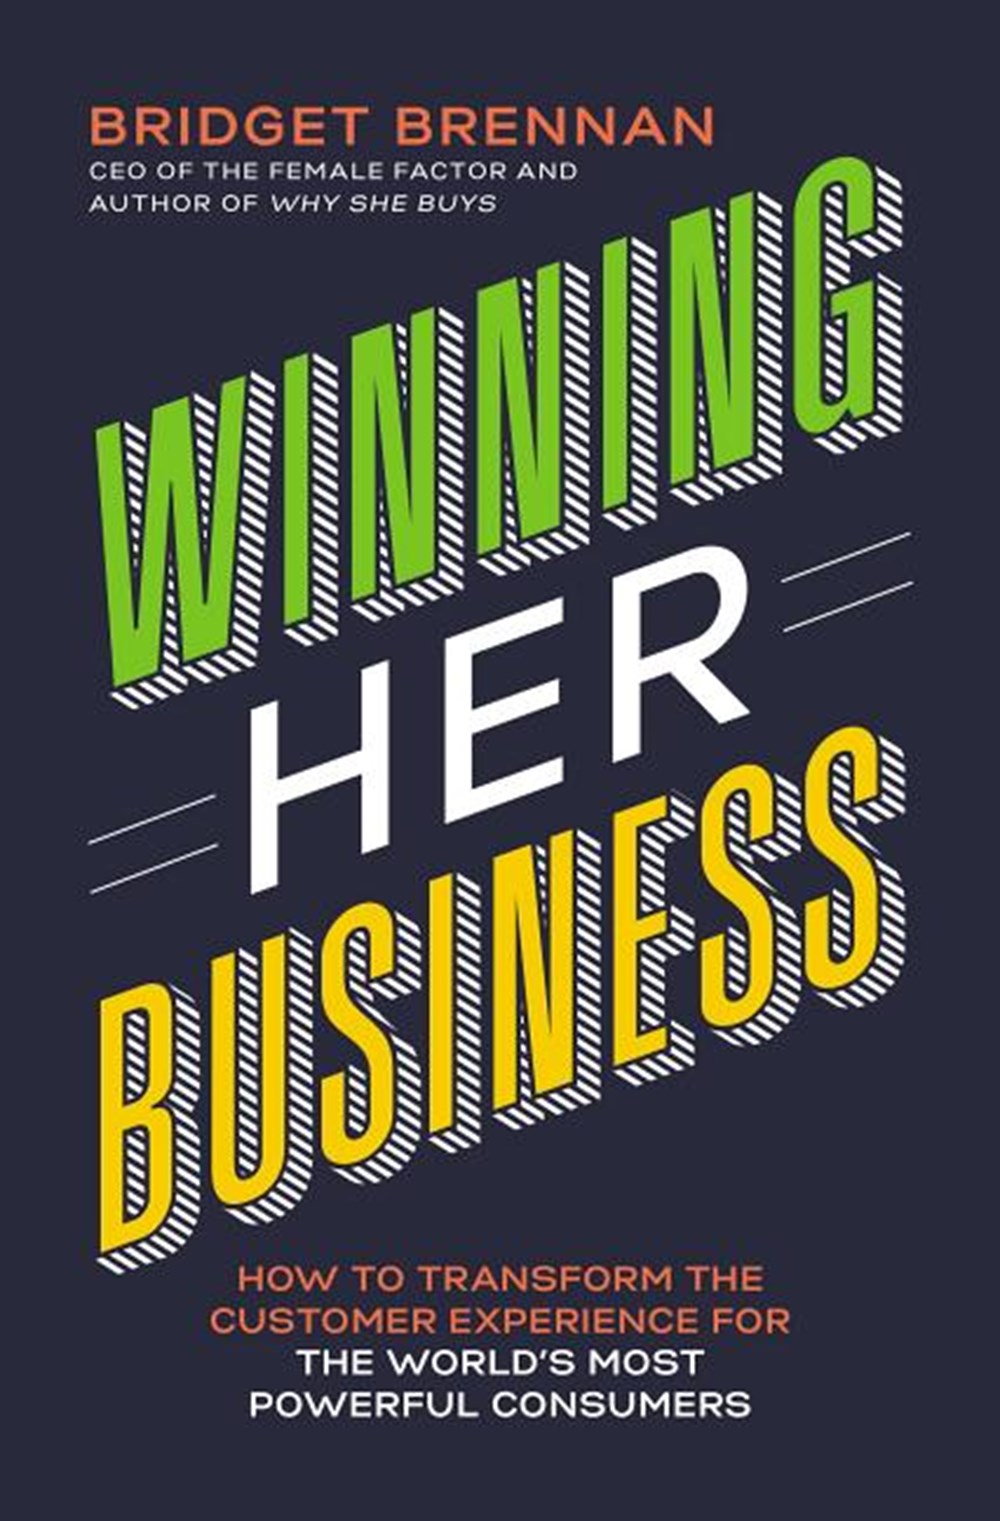 Winning Her Business: How to Transform the Customer Experience for the World's Most Powerful Consume